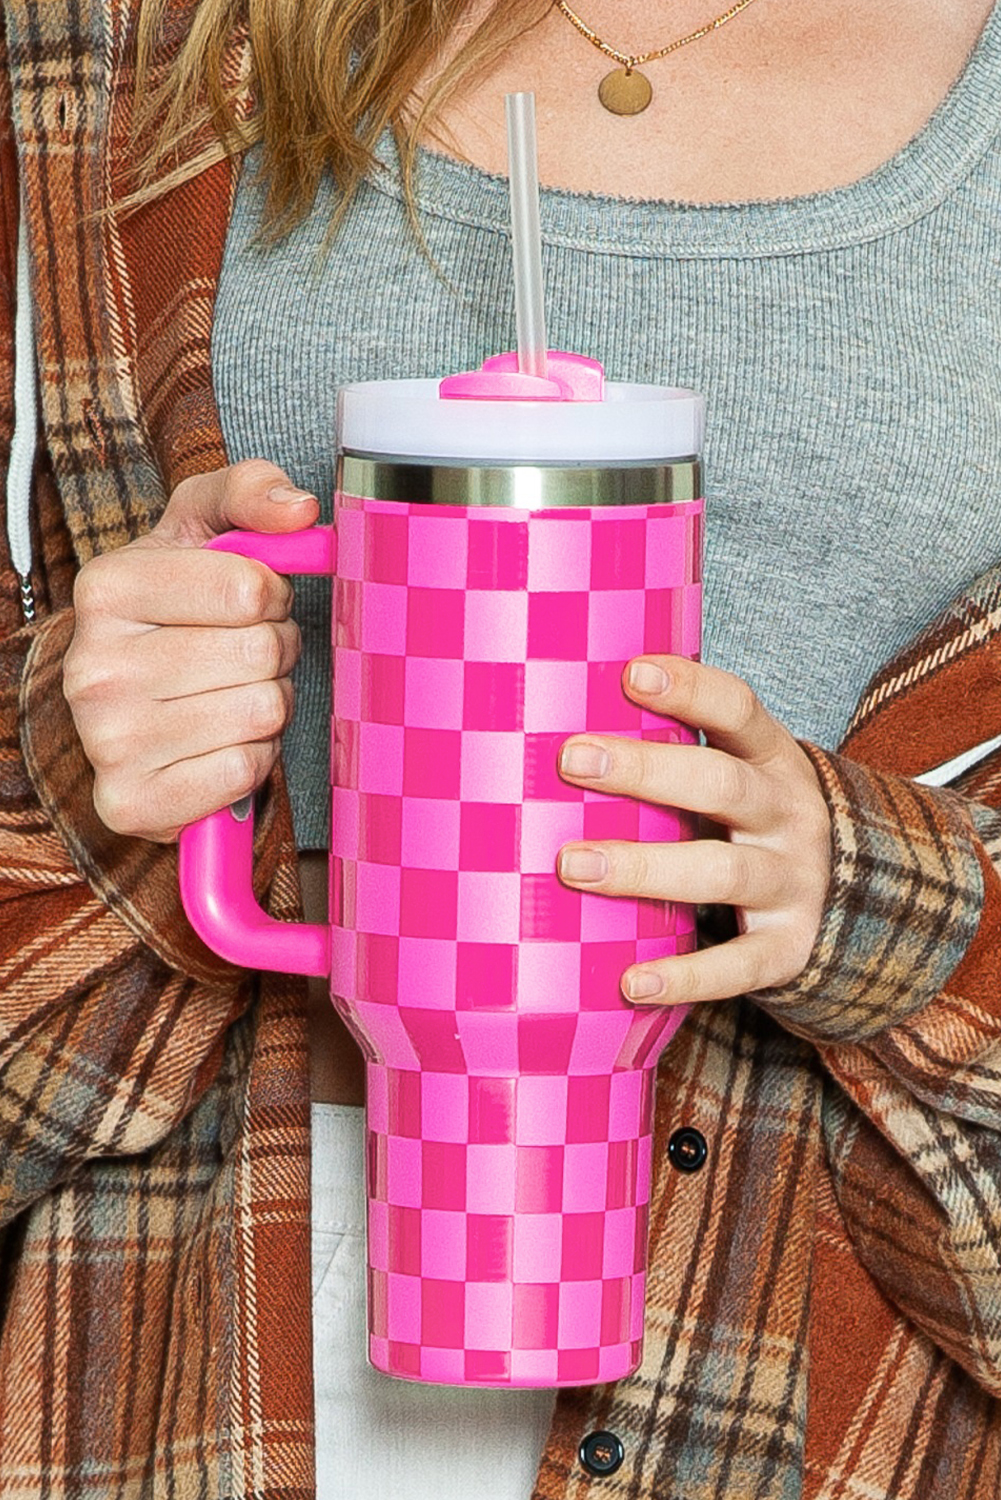 Shewin Wholesale Western Clothes Pink Checkered Print Handled Stainless Steel Tumbler Cup